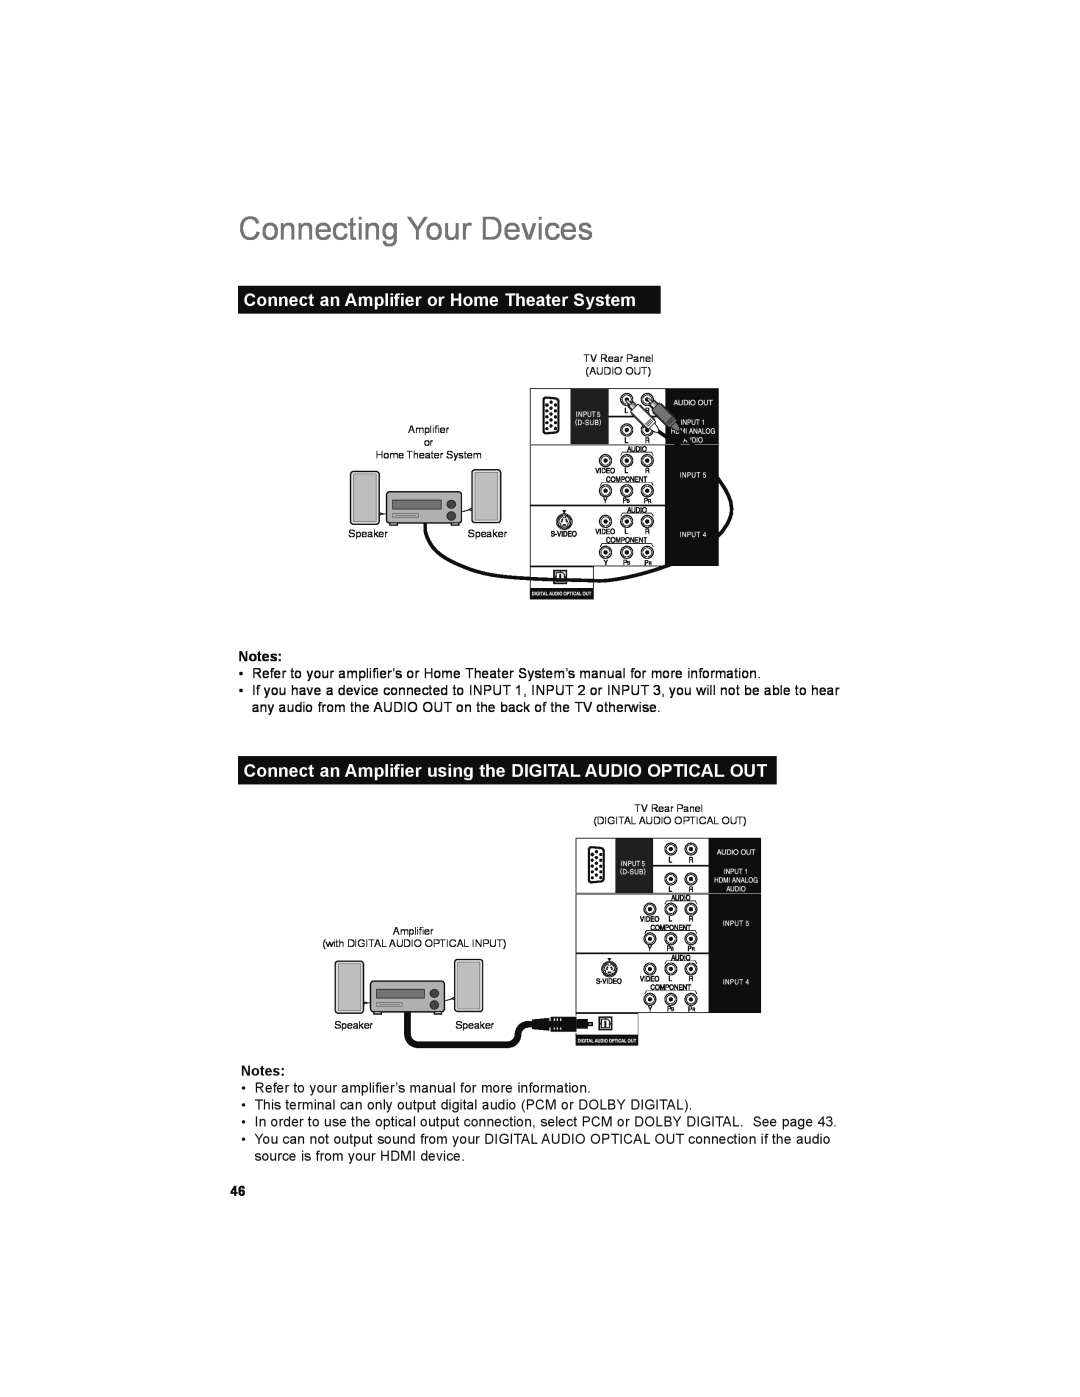 JVC LT-32JM30 manual Connecting Your Devices, Connect an Amplifier or Home Theater System 